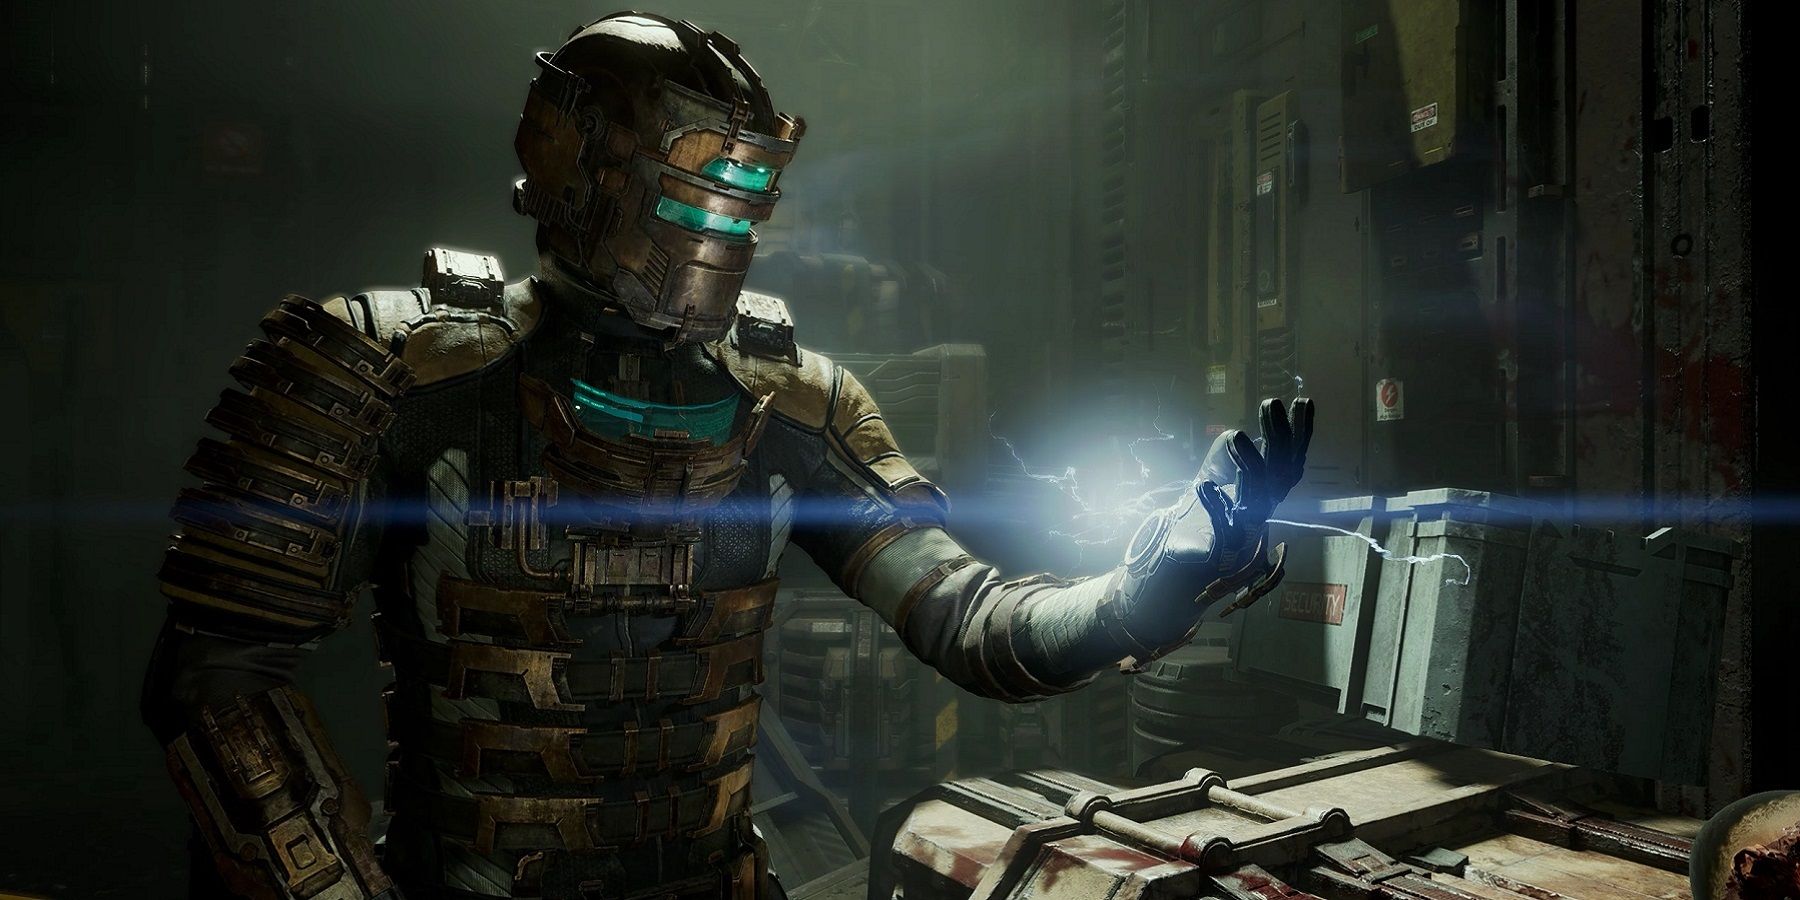 An image from the Dead Space remake of Isaac Clarke looking at his glowing hand.